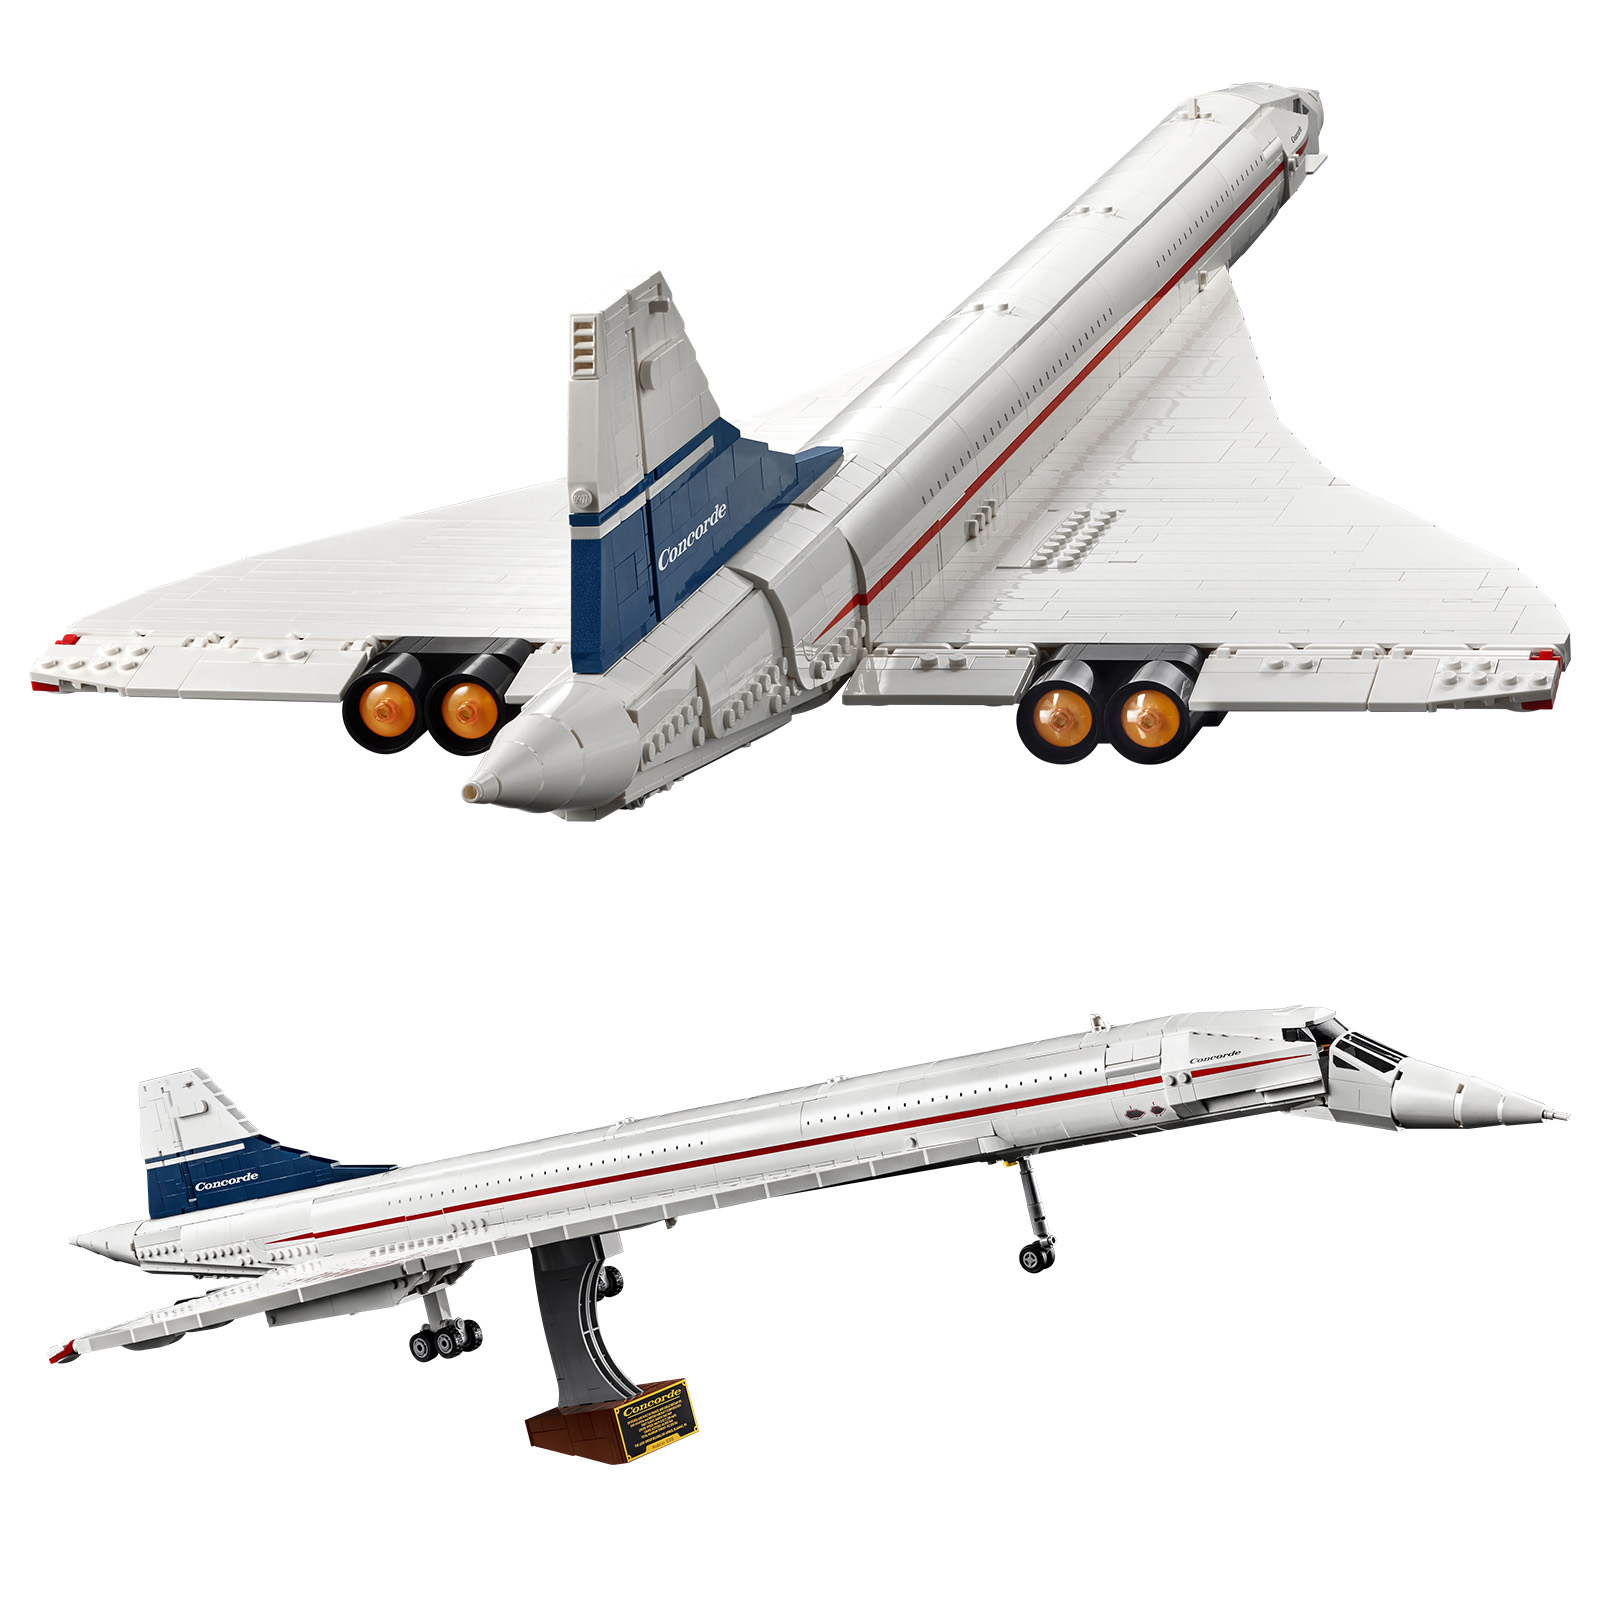 ▻ LEGO ICONS 10318 Concorde: The set is online on the Shop - HOTH BRICKS